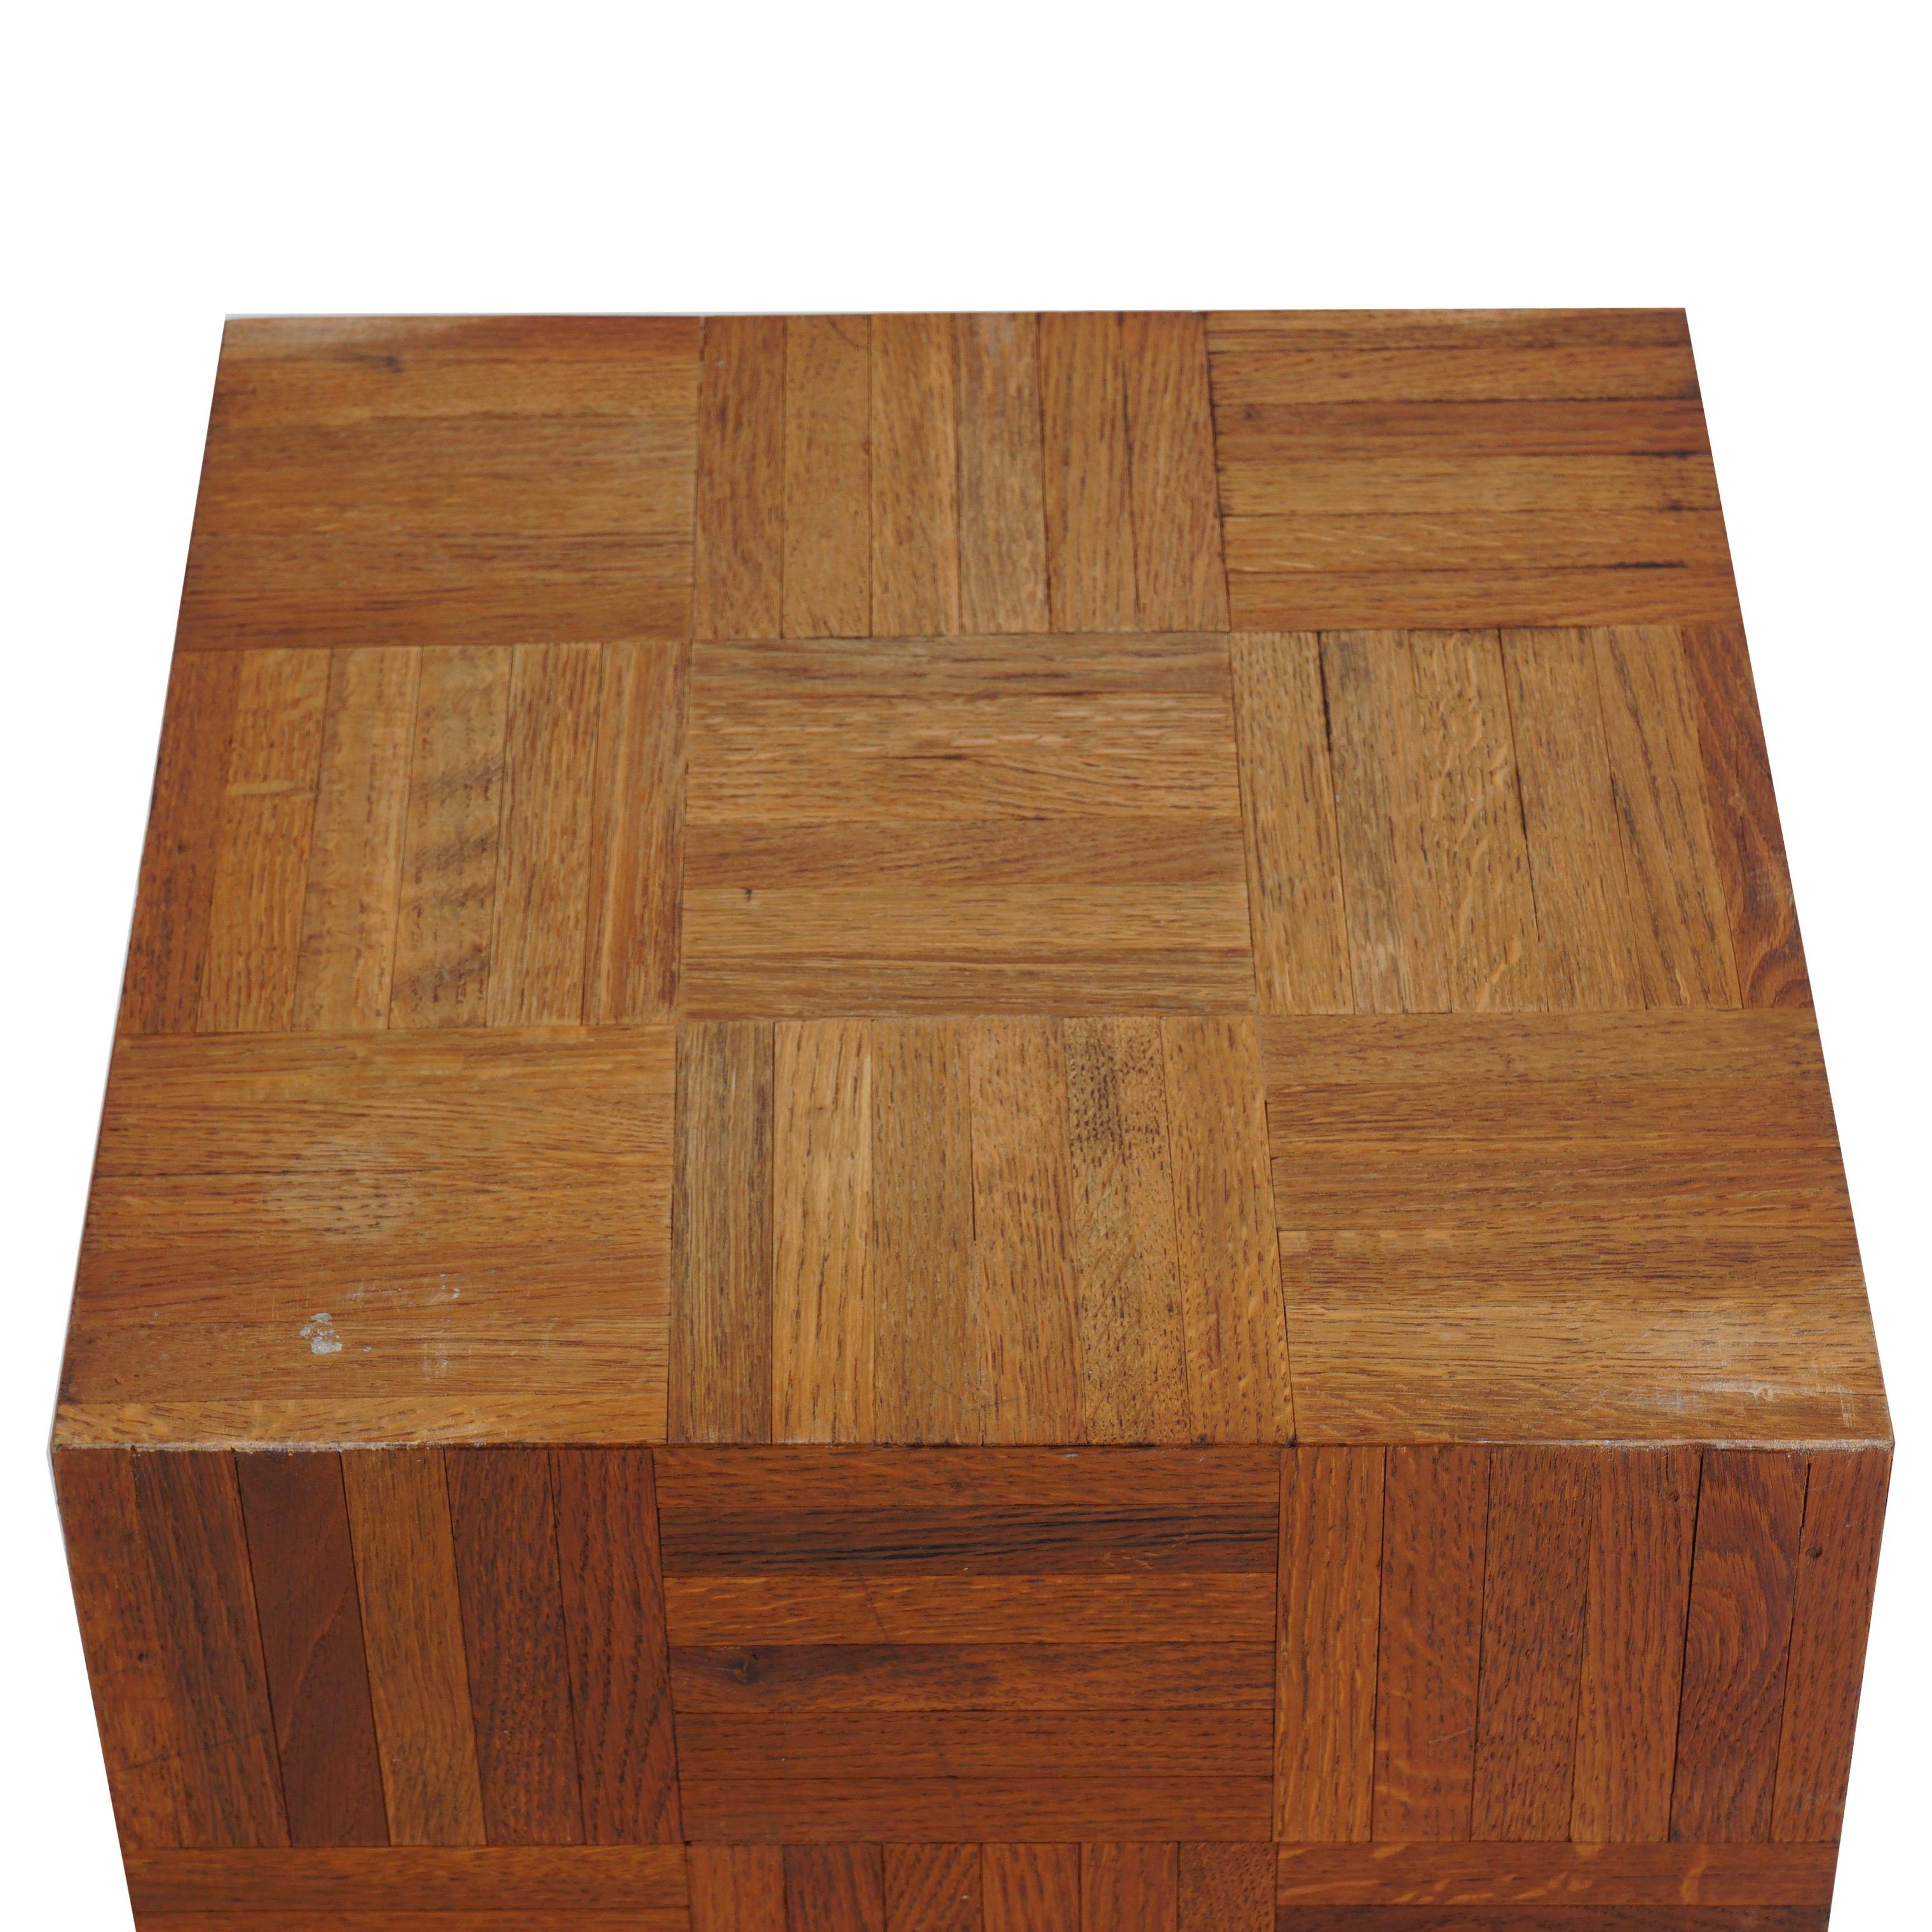 Well, well, well, look at this little rebel – a cube rolling accent table straight outta the midcentury madness of the '70s. Made from oak parquet, this is the unsung hero of your living room. Picture this: you're kickin' back on the couch, maybe